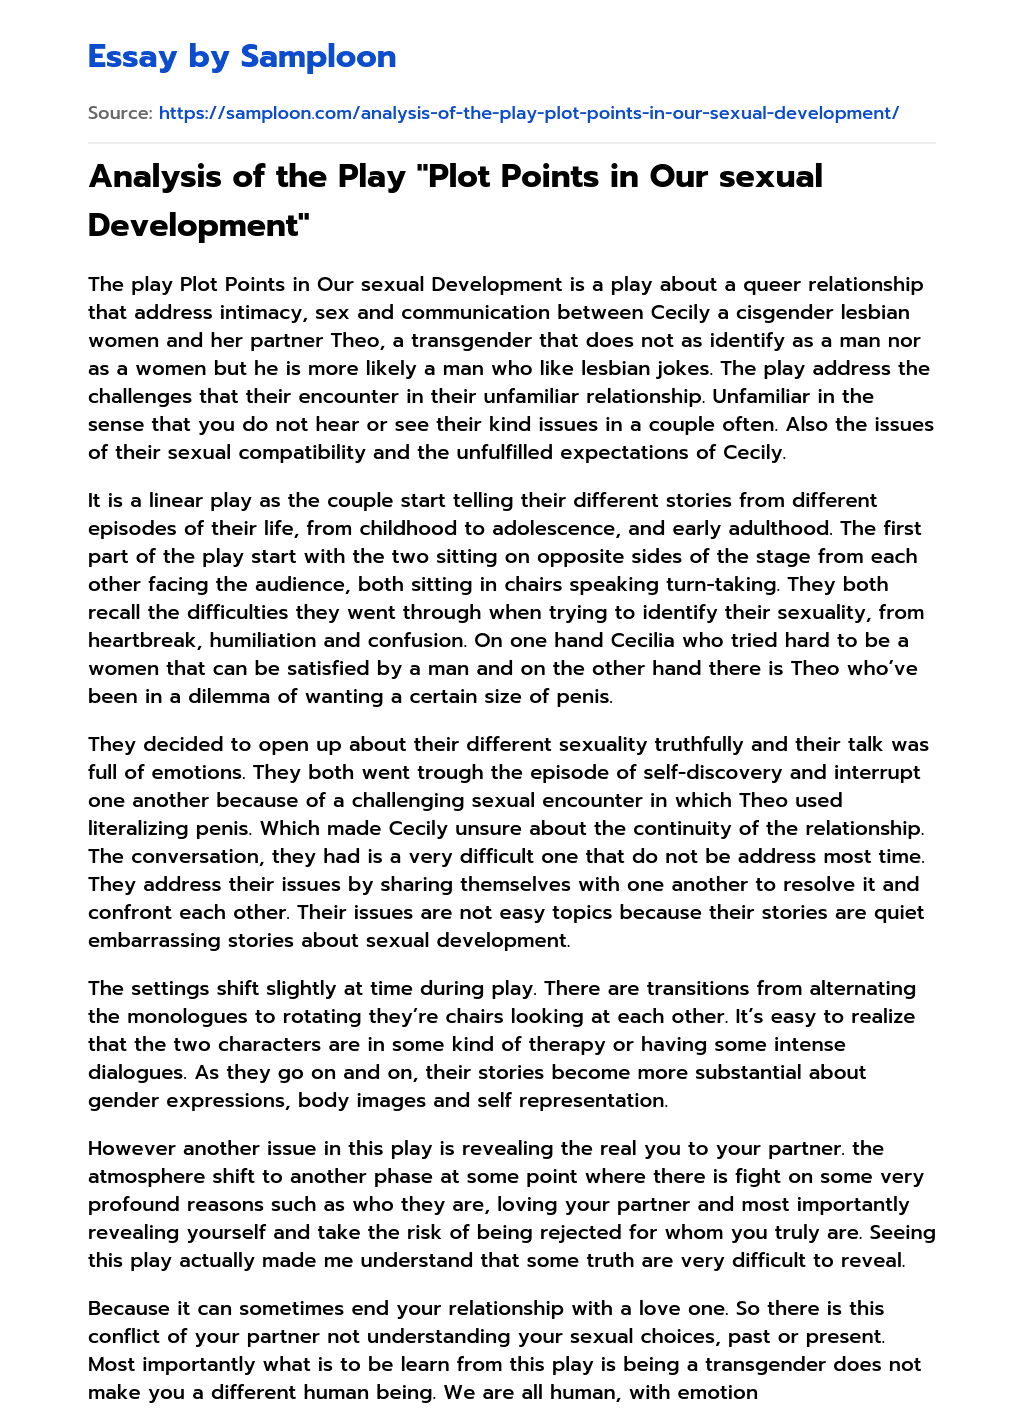 Analysis of the Play “Plot Points in Our sexual Development” essay